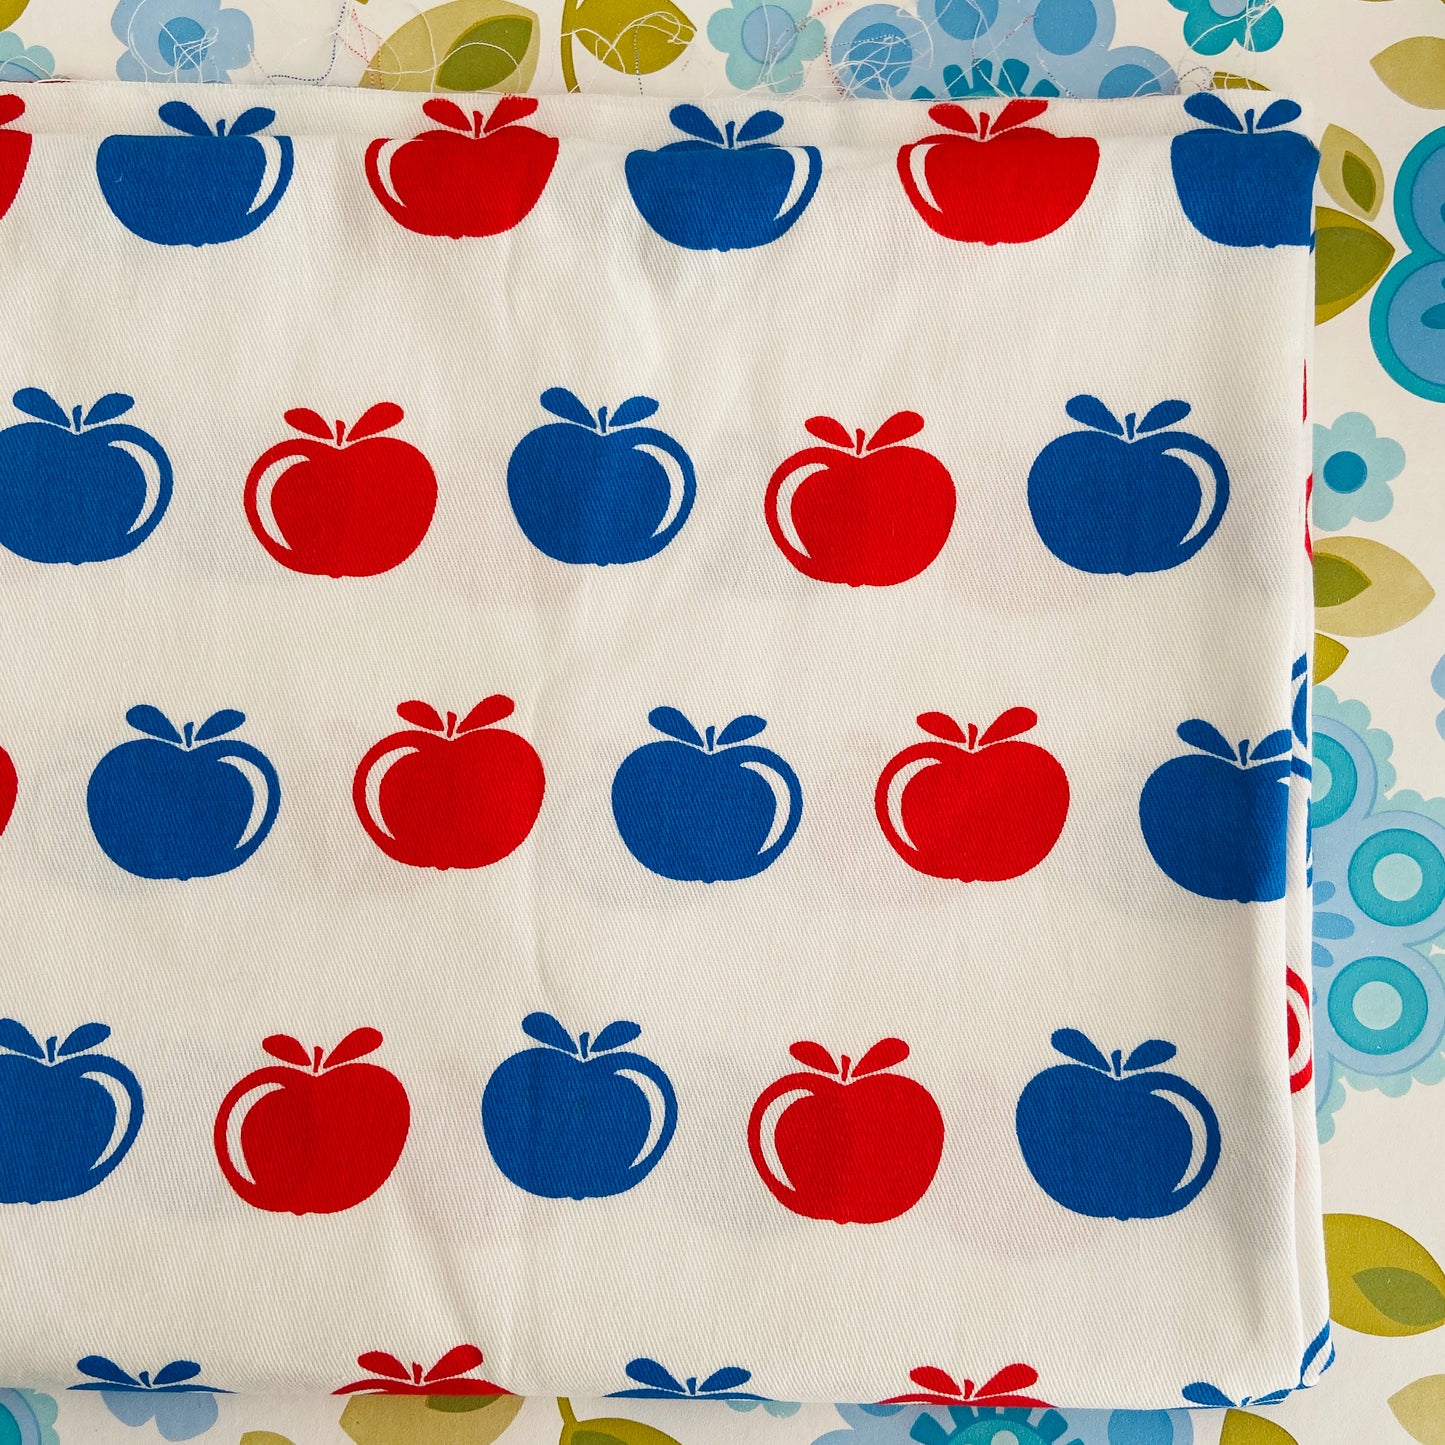 Vintage Apple Cotton Fabric Cushions Bags Thick